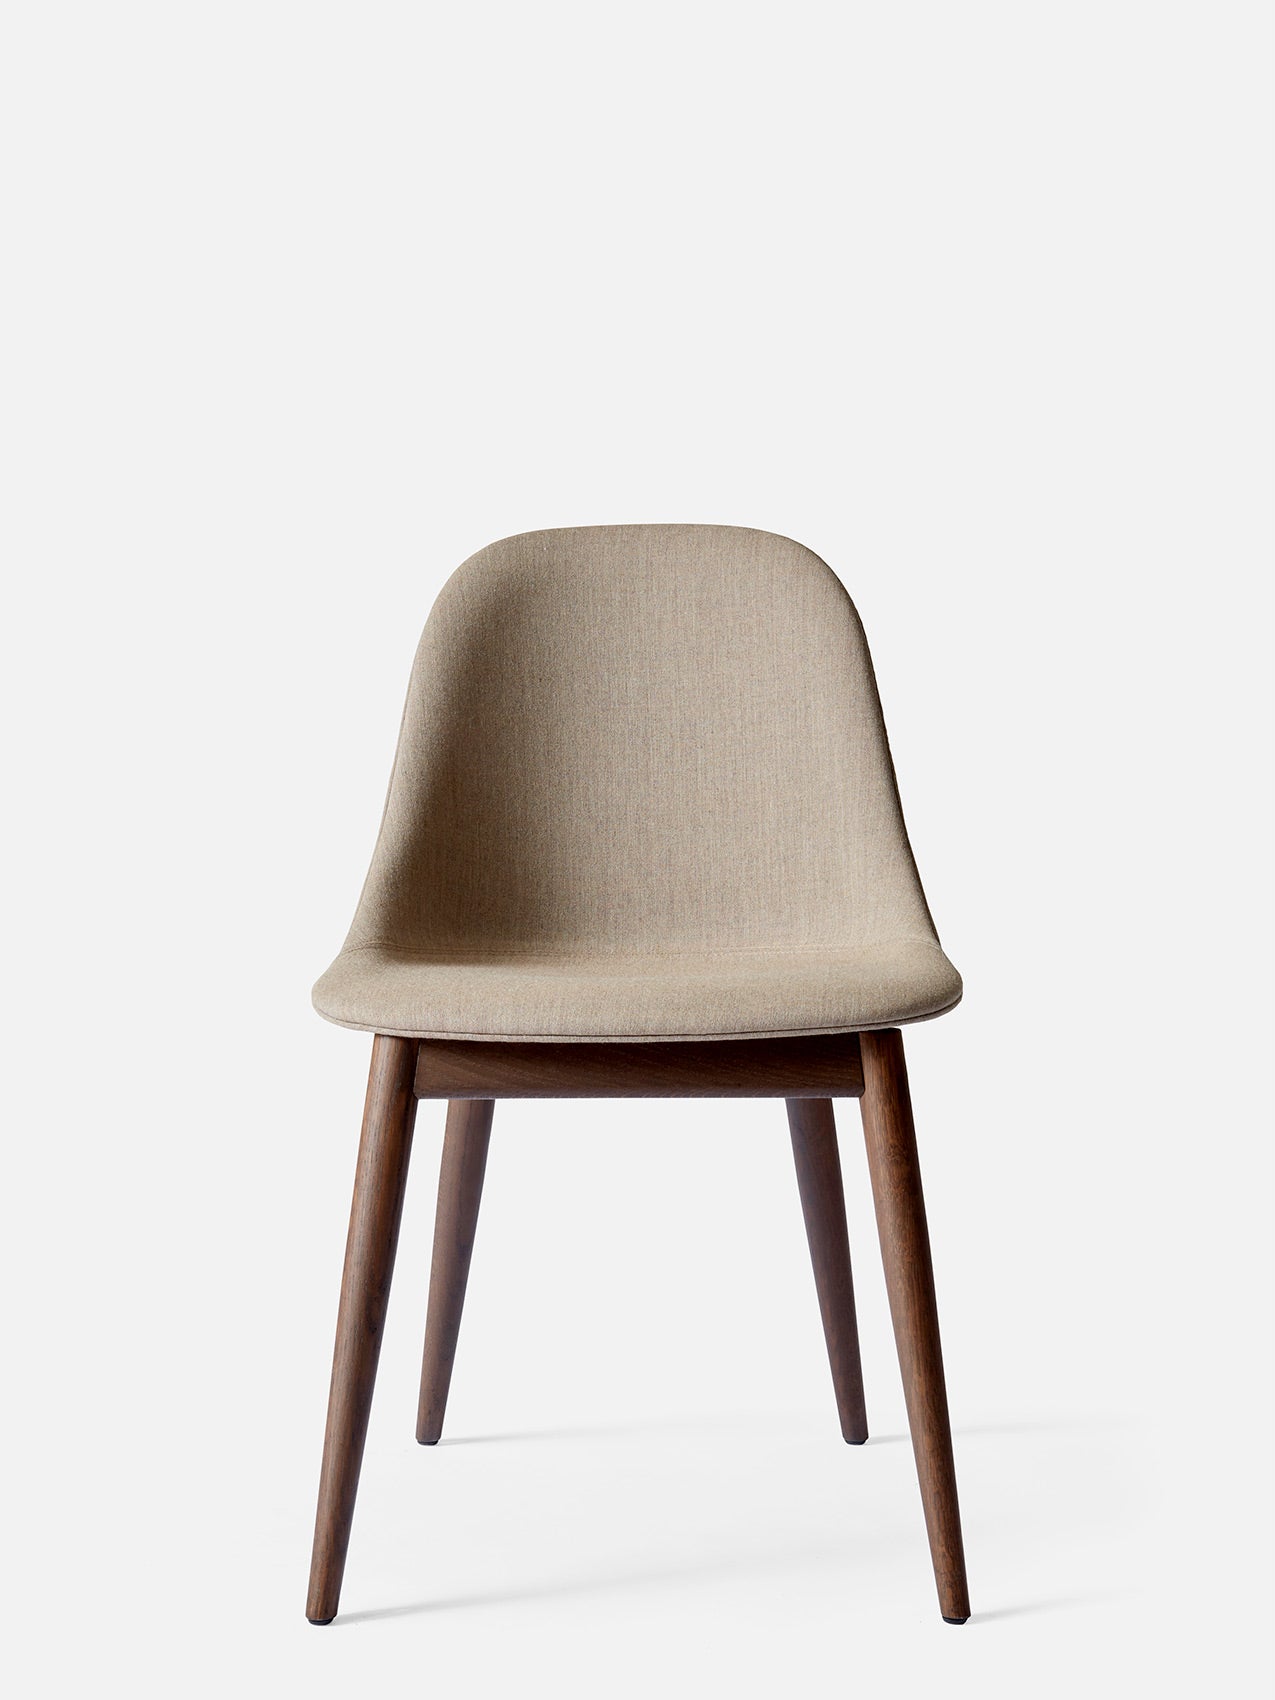 Harbour Side Chair, Upholstered-Chair-Norm Architects-Dining Height (Seat 17.7in H)/Dark Oak-233/Remix3-menu-minimalist-modern-danish-design-home-decor